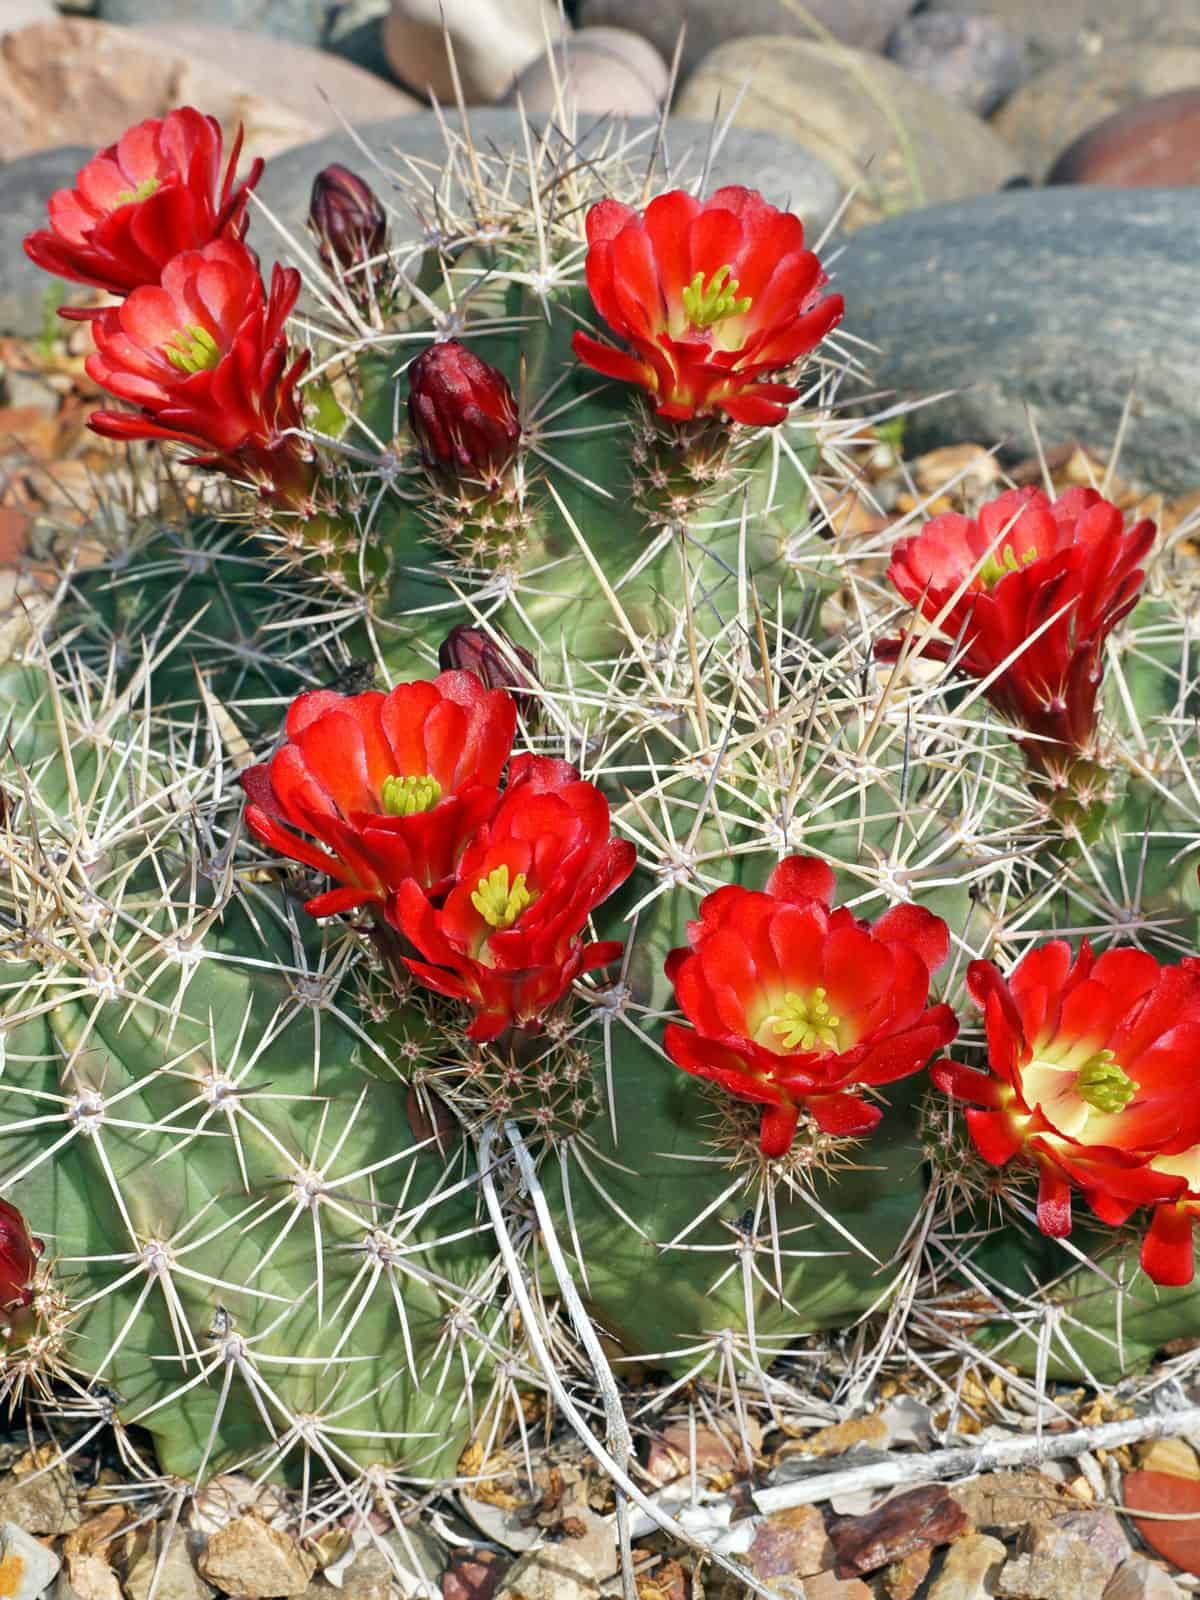 Huge spikes of a Chin Cactus along with blooming bright red flowers